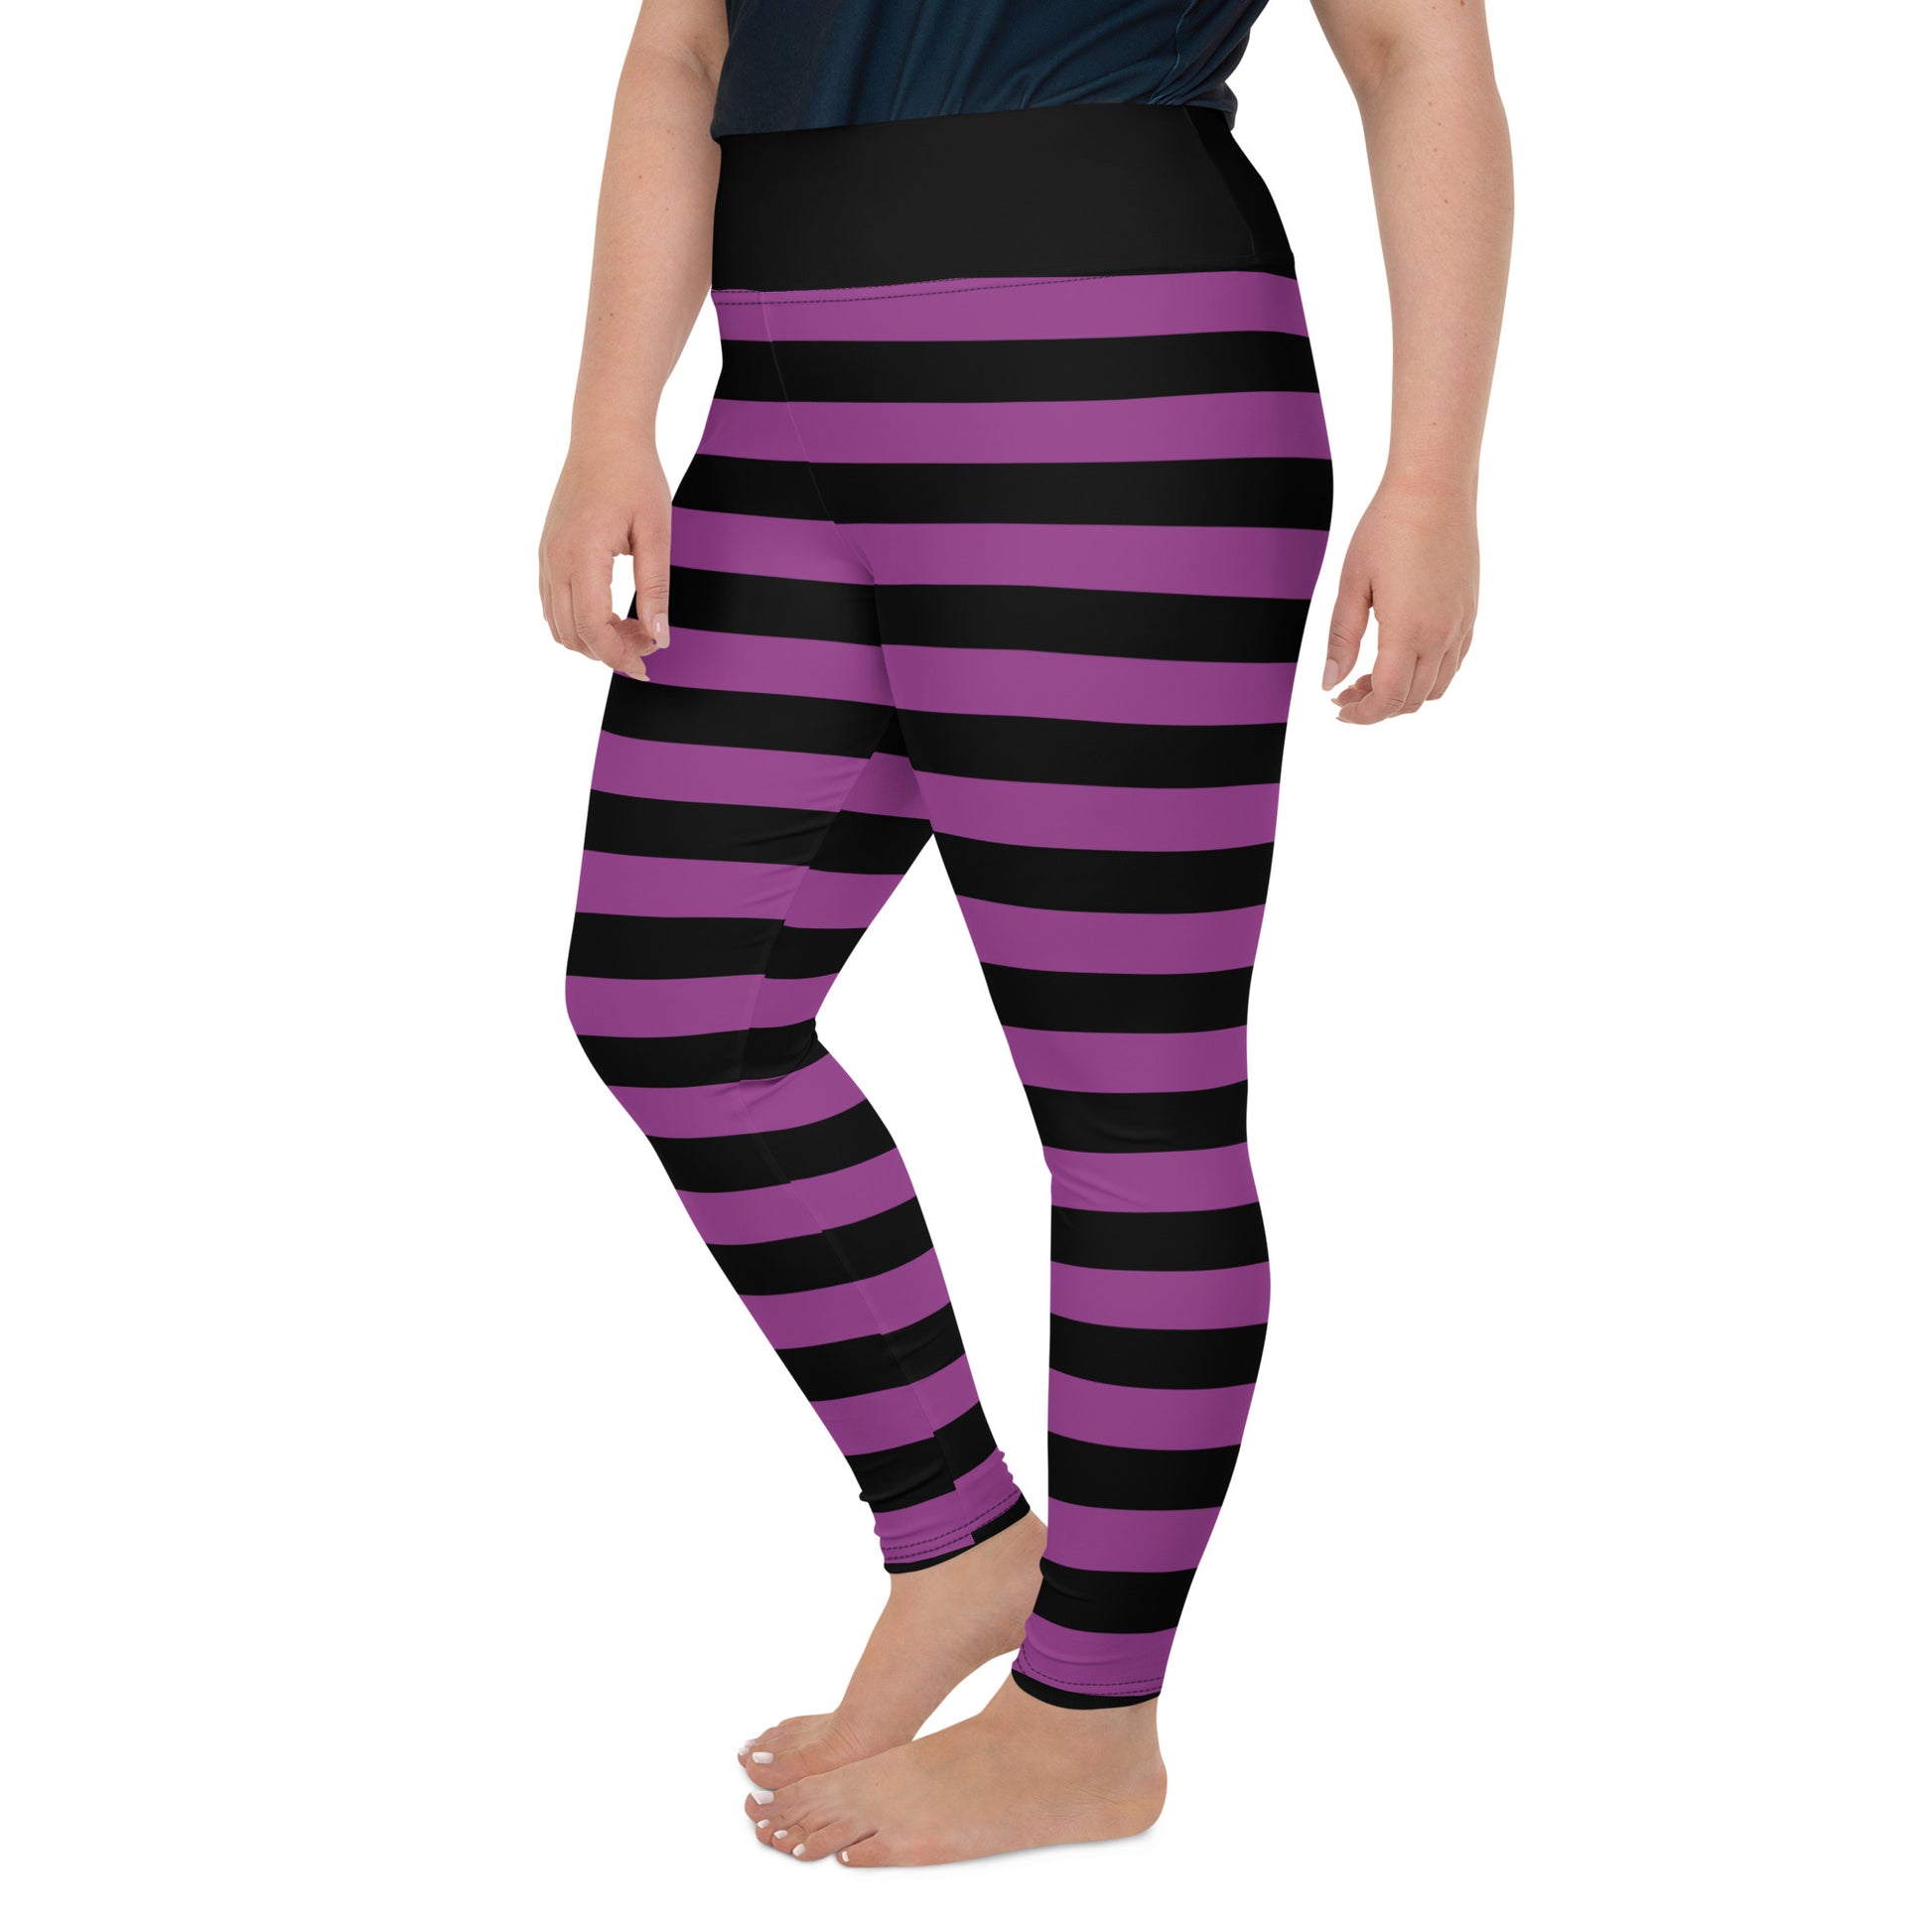 Black and Purple Striped Plus Size Leggings Women, Halloween Witch